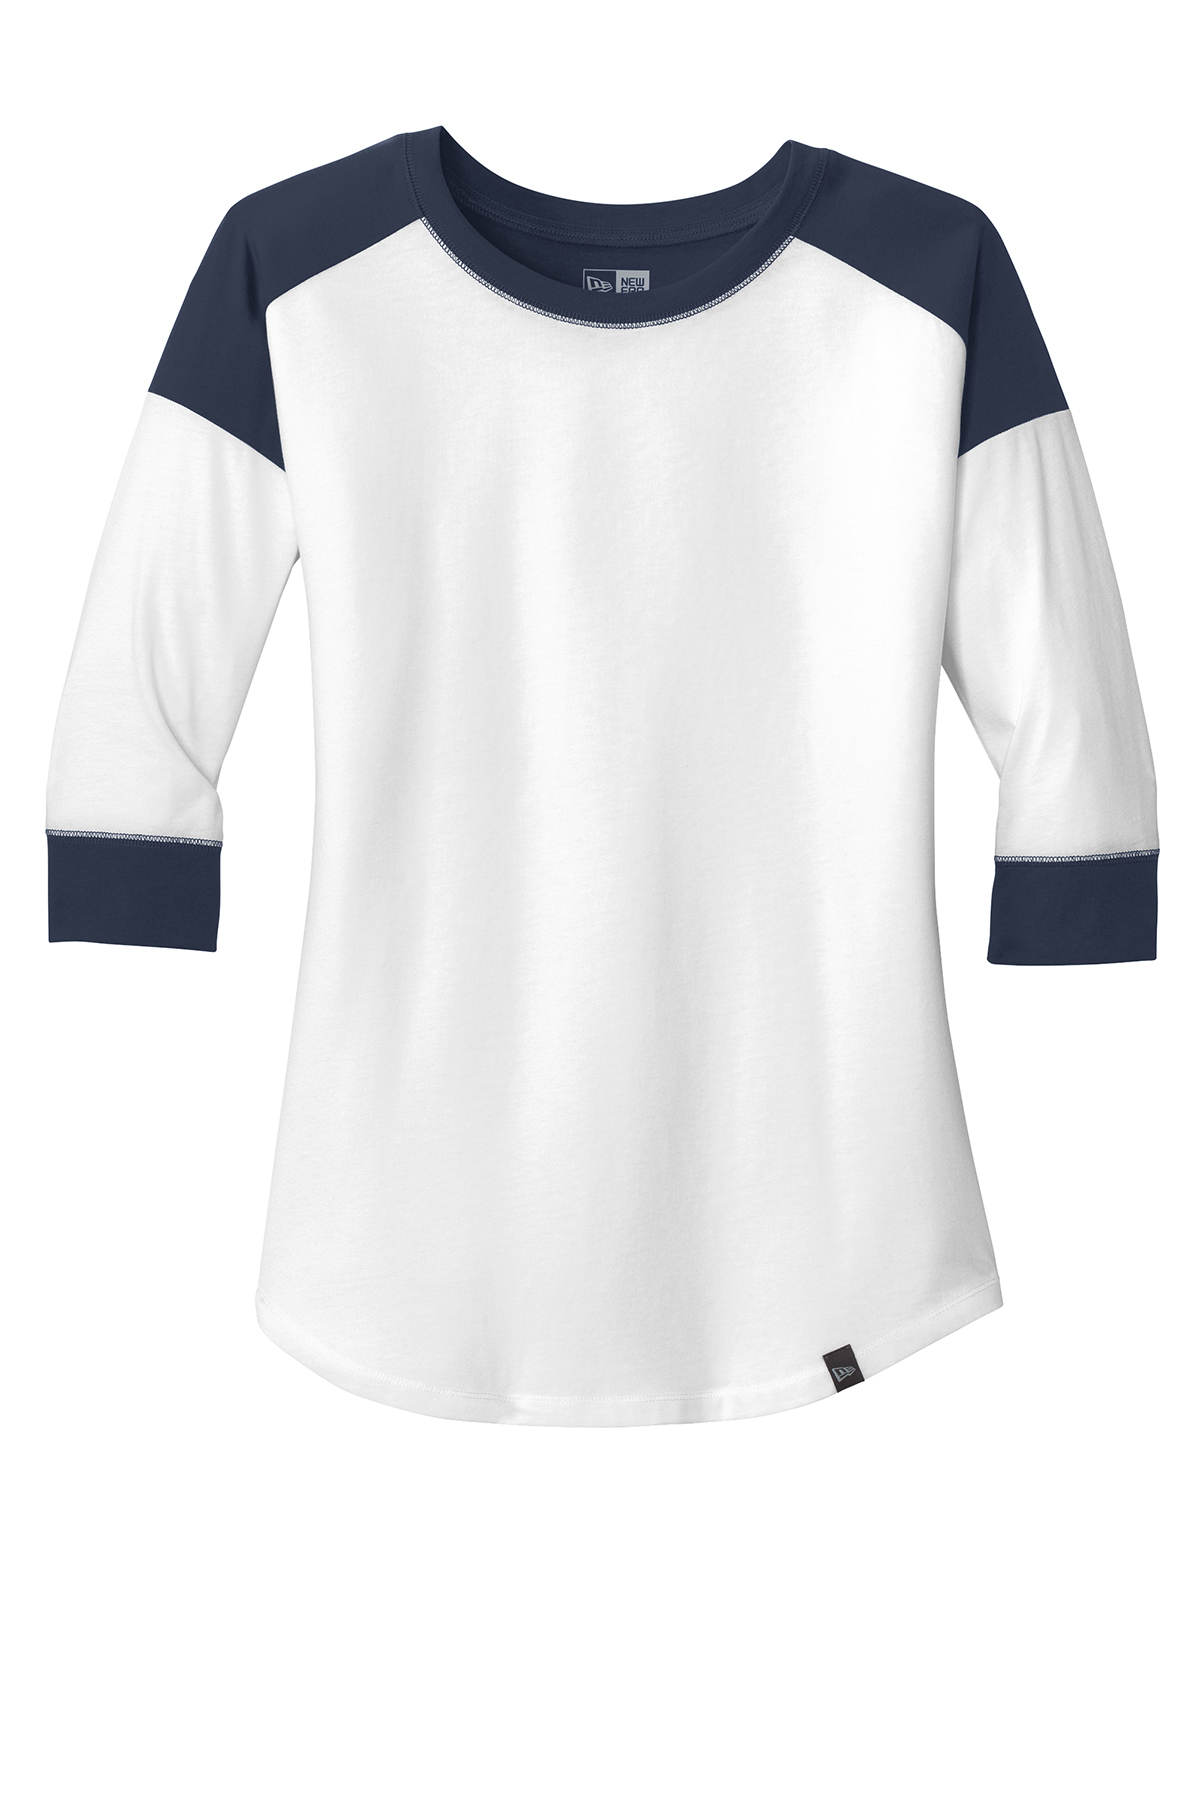 New DistRict Made 3/4 Sleeve Tri Blend Baseball Tee Top 3X  MSRP $24.00 